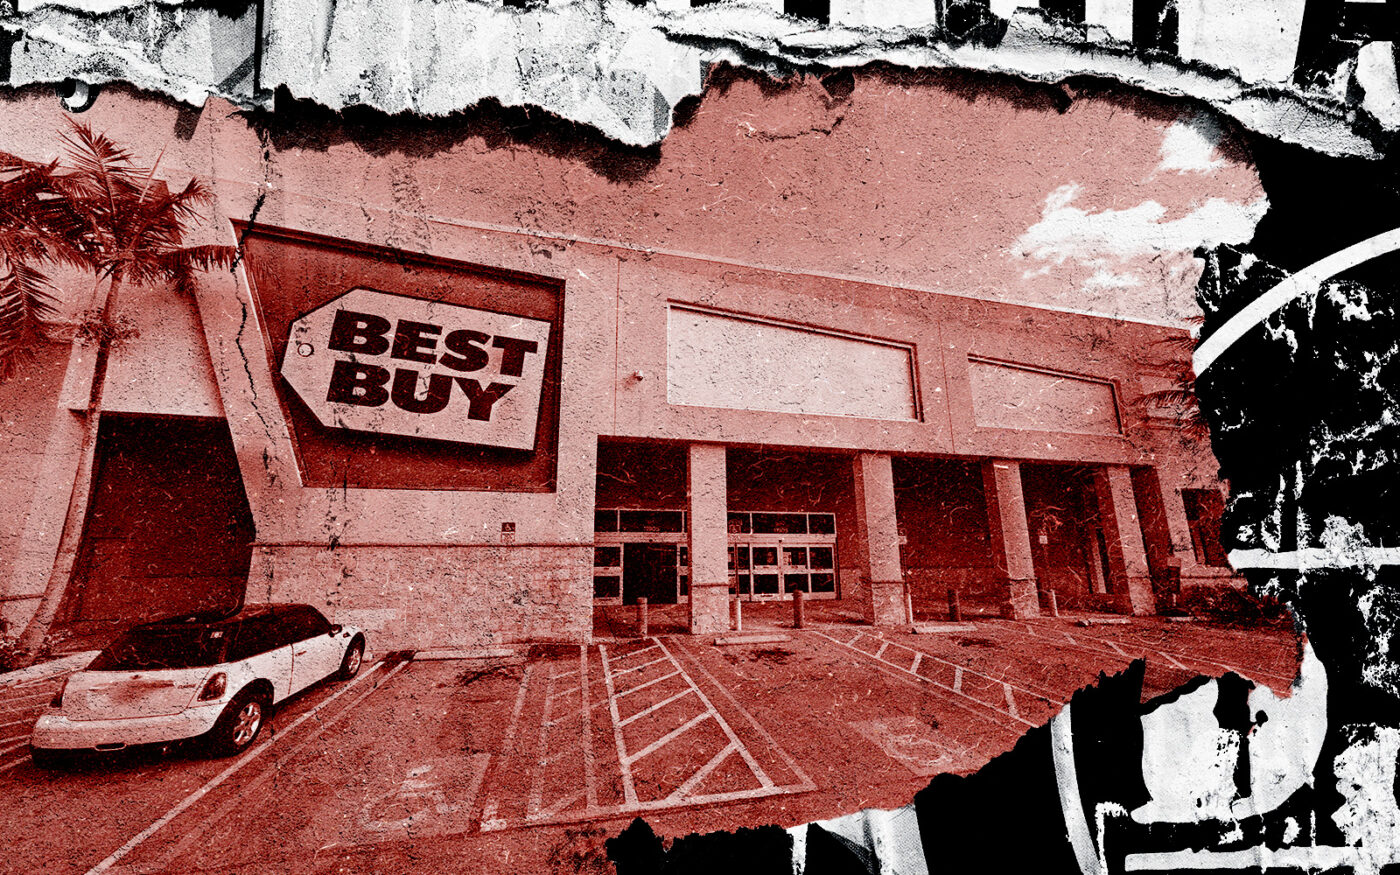 Owner Of Ex-Best Buy Store In Pinecrest Files For Bankruptcy